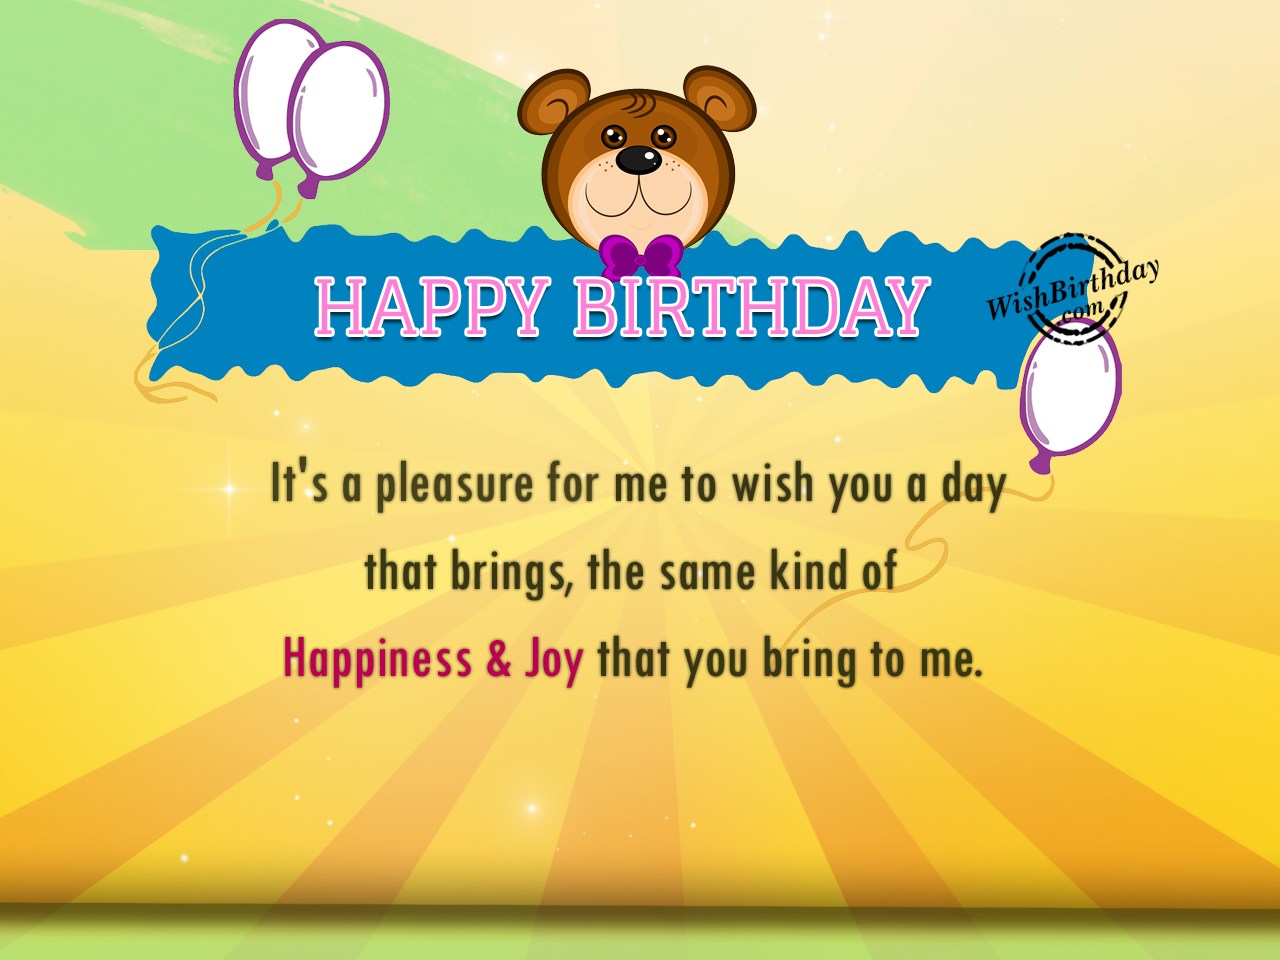 It’s A Pleasure For Me to Wish You This Day - Birthday Wishes, Happy ...